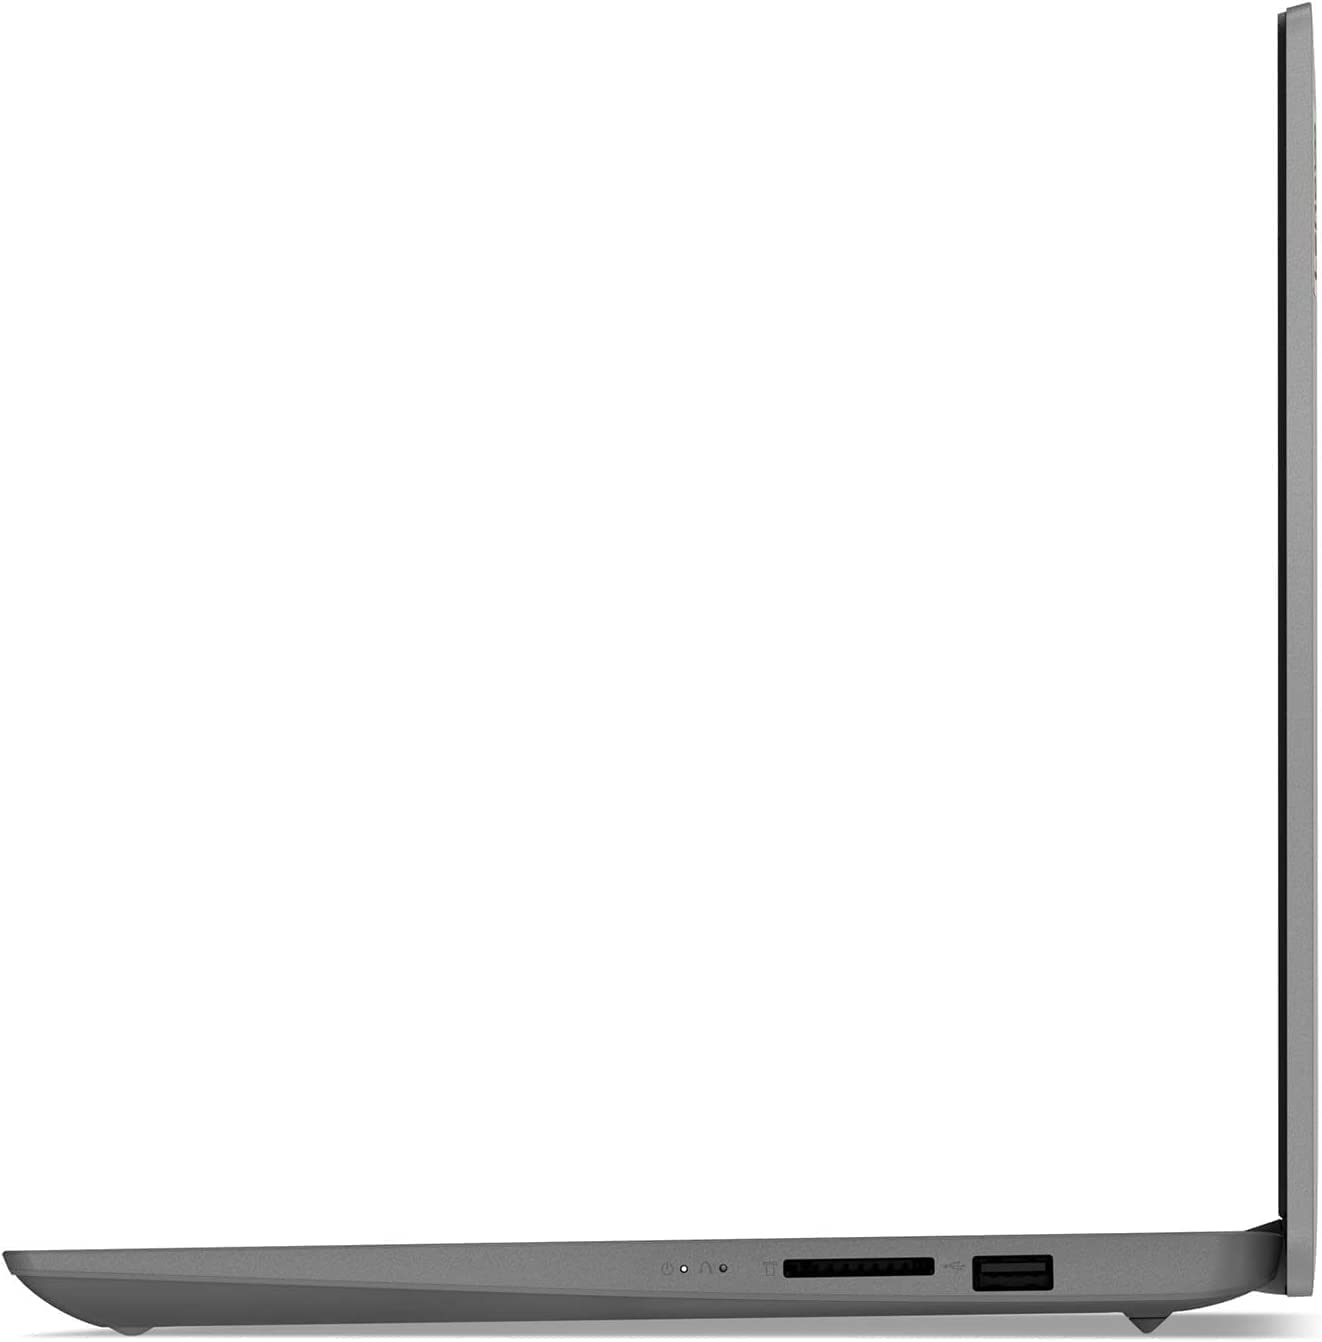 Lenovo IdeaPad 3 14" FHD Laptop, Intel Core i5-1135G7(Up to 4.20GHz), 20GB DDR4 RAM, 1TB NVMe SSD, Webcam, Fingerprint Reader, HDMI, WiFi 6, Type-A&C, Win 11,CUE Accessories,